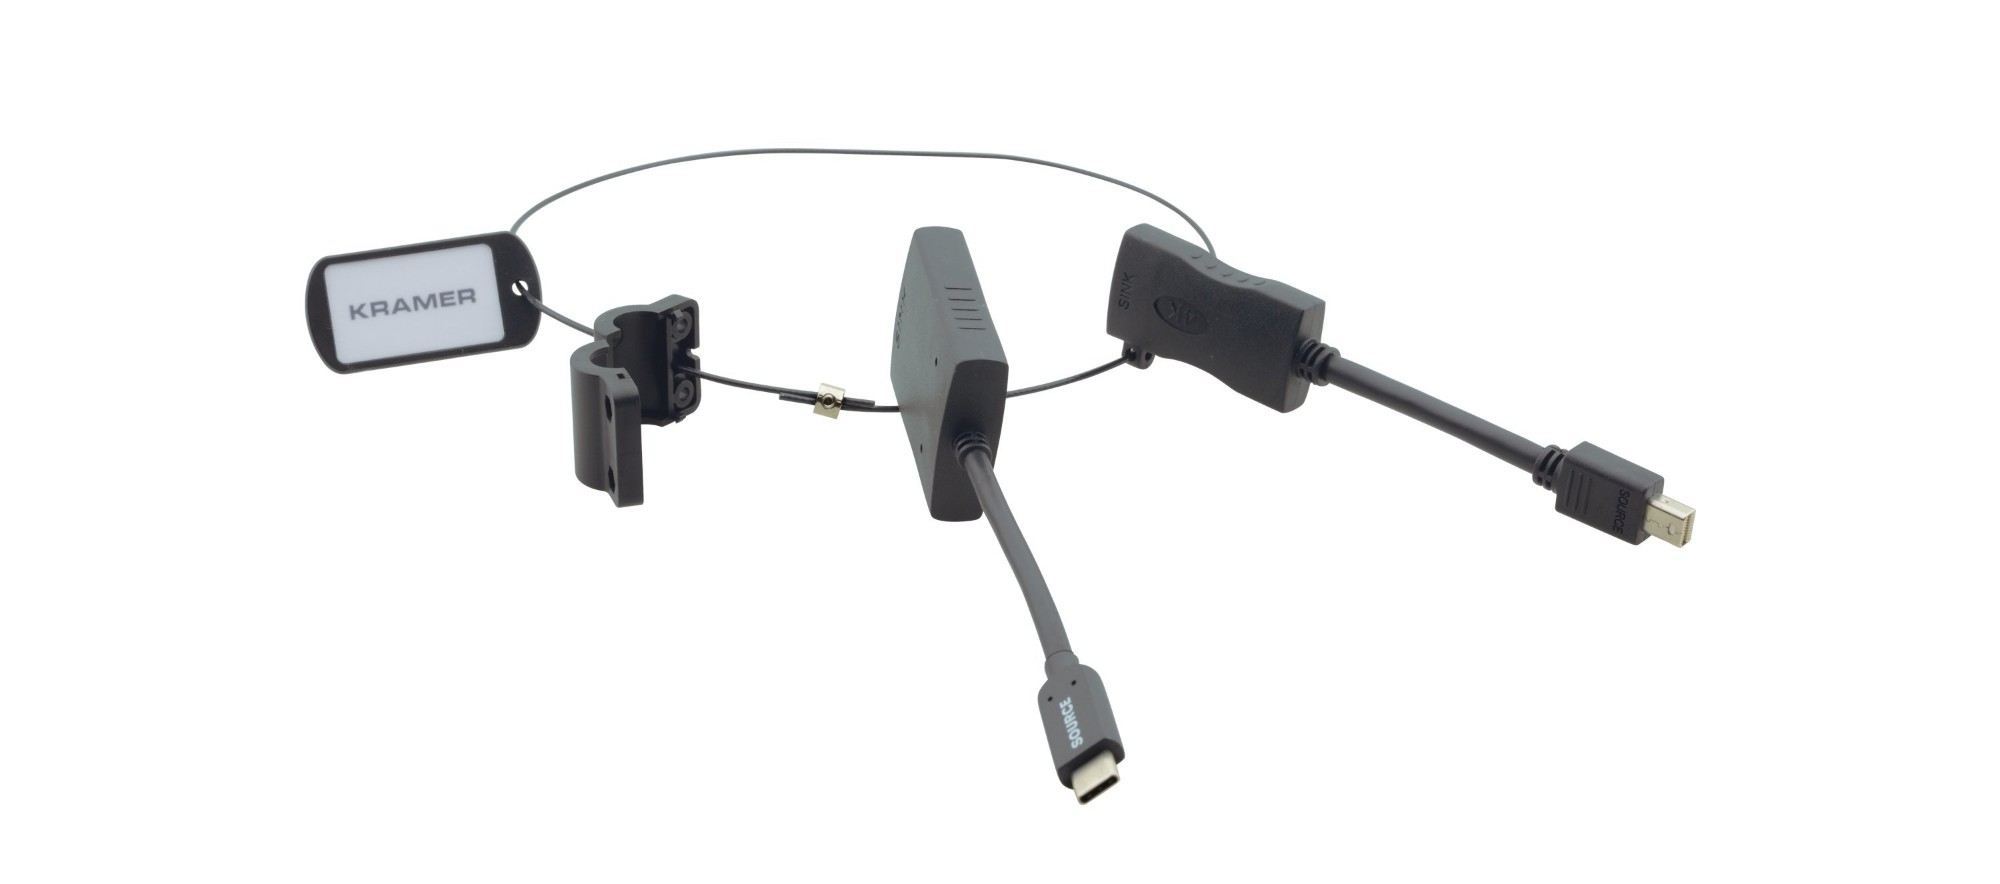 AD-RING-4 KRAMER ELECTRONICS Included adapters: Mini DisplayPort (M) to HDMI (F) adapter cable; USB Type-C (M) to HDMI (F) adapter cable